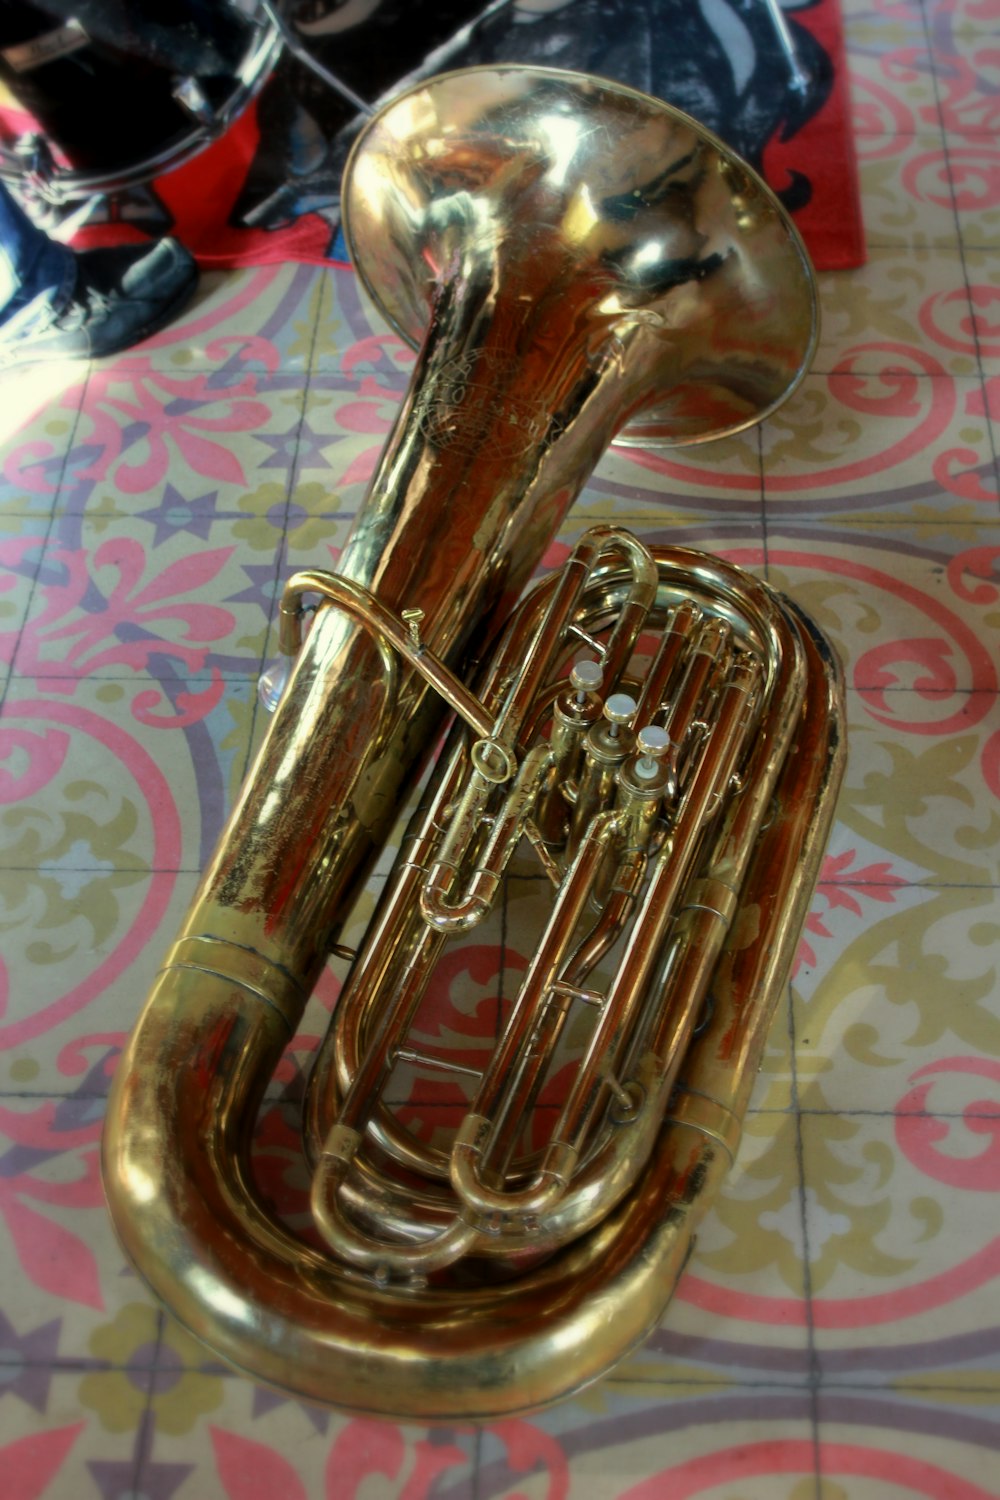 a close up of a trumpet on a tiled floor